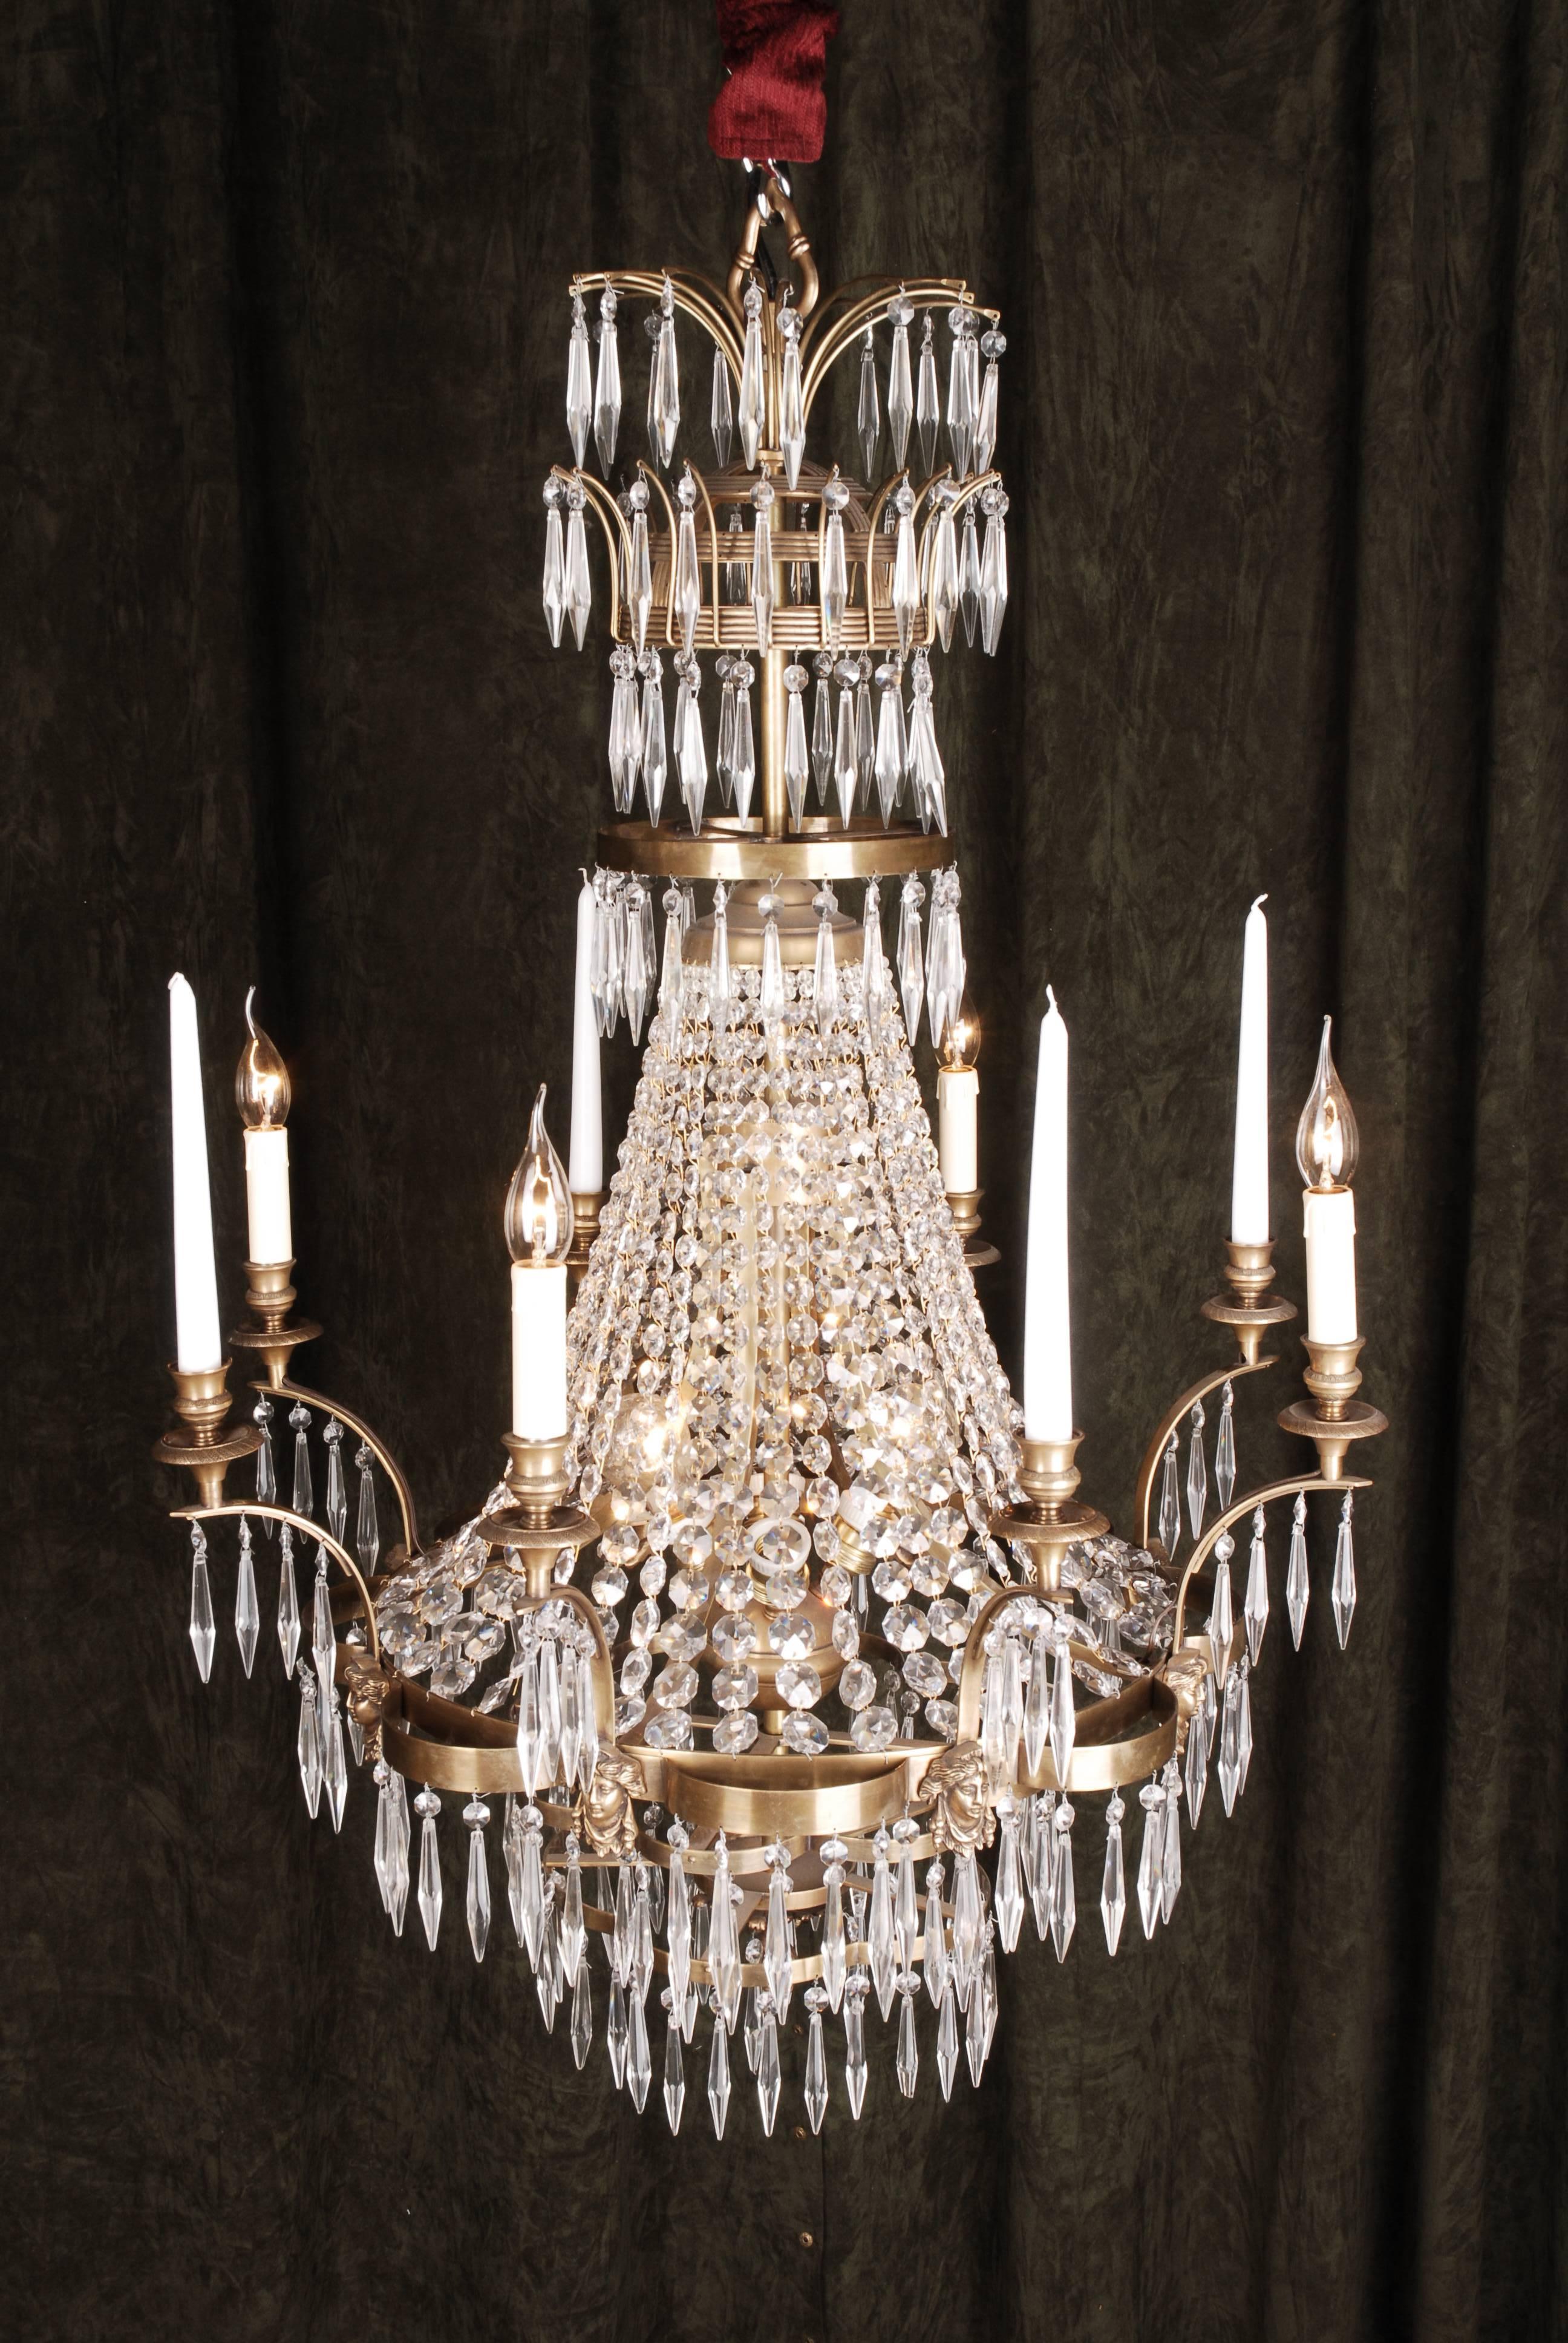 Large Swedish ceiling chandelier in classicist style.
Solid brass with an antique finish. Hangings from finely ground crystal.

(F-Ra-62).